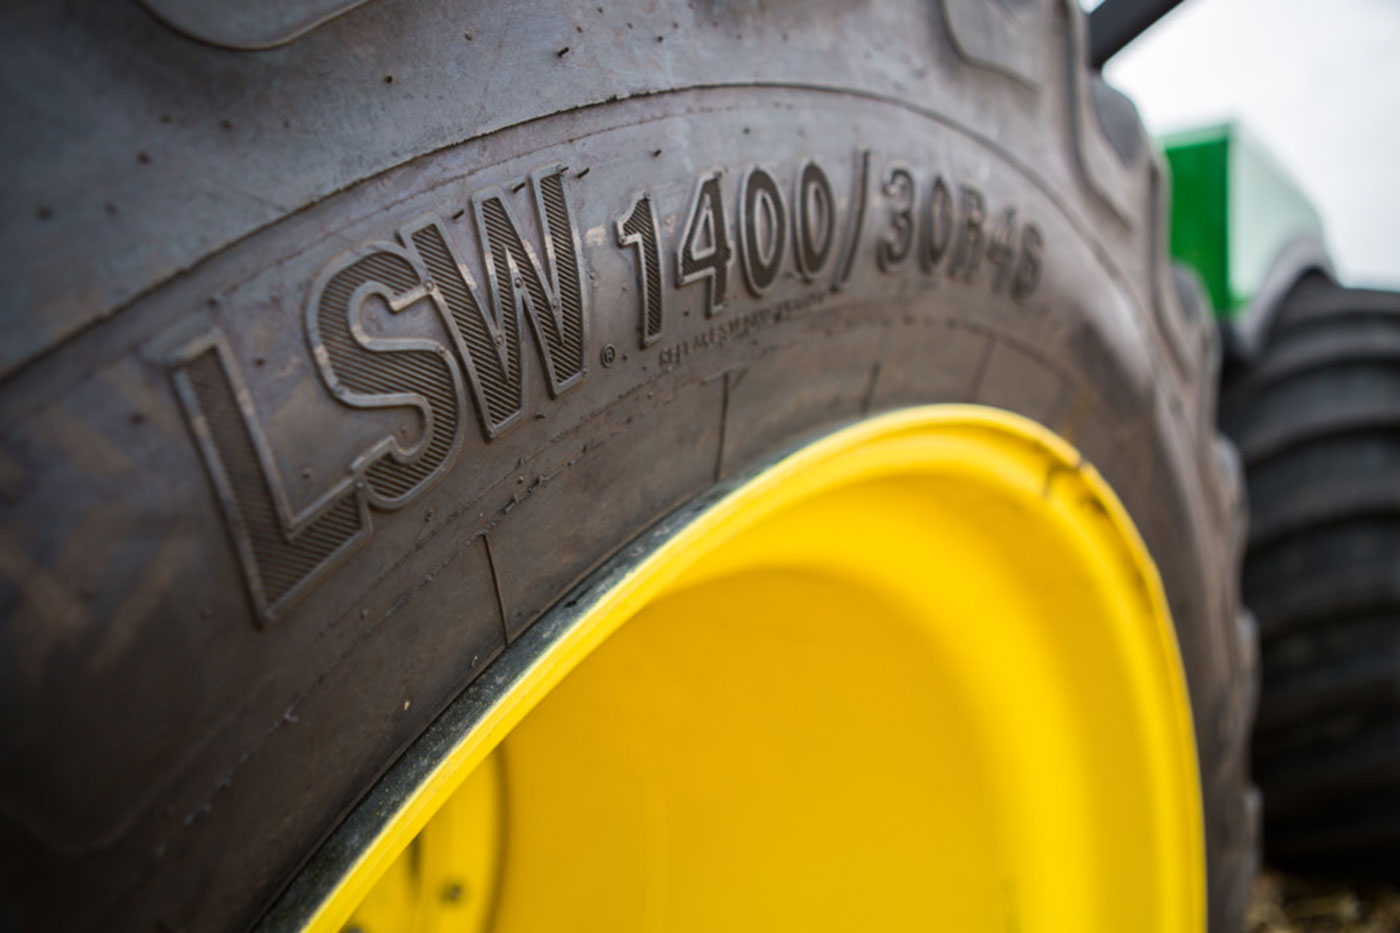 LSW tires are Low Sidewall